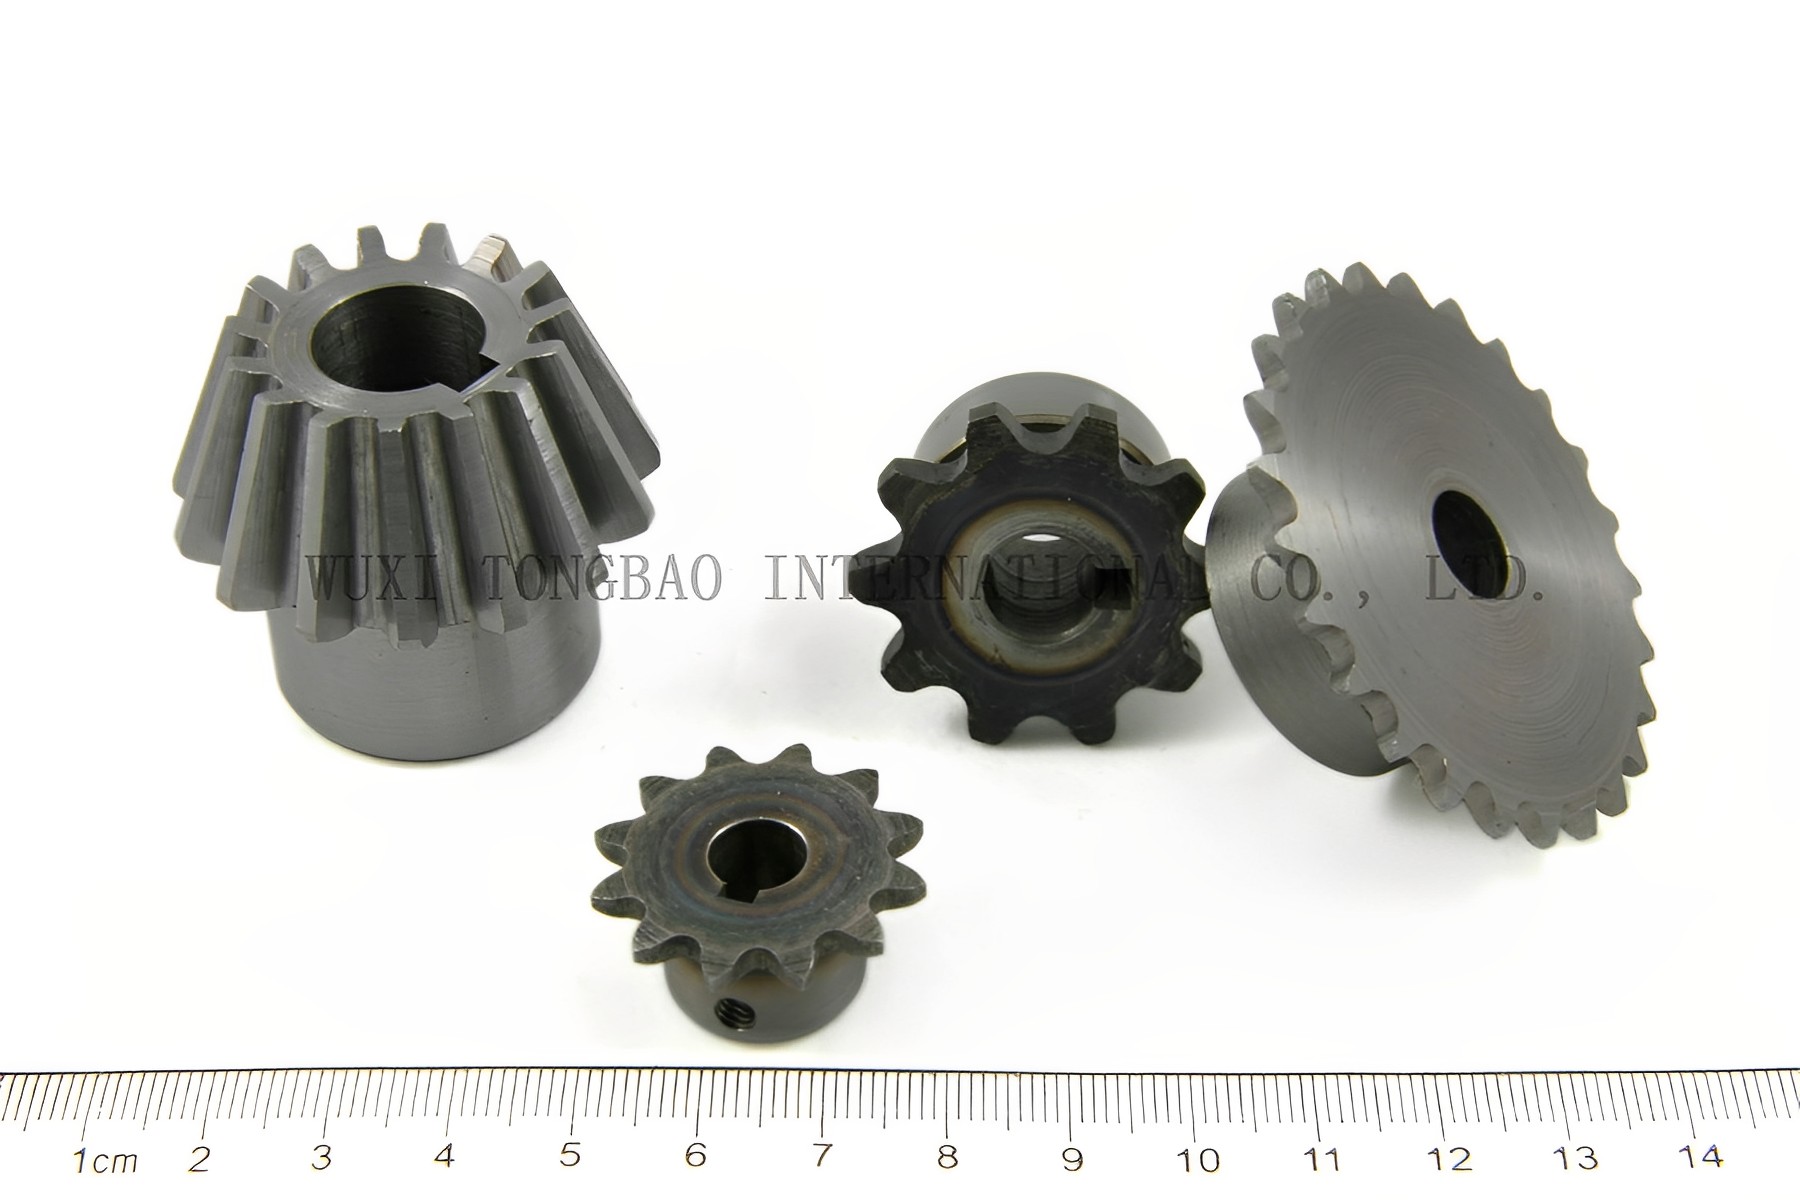 OEM/ODM Customized Industrial Sprocket for Conveyor Chain Featured Image